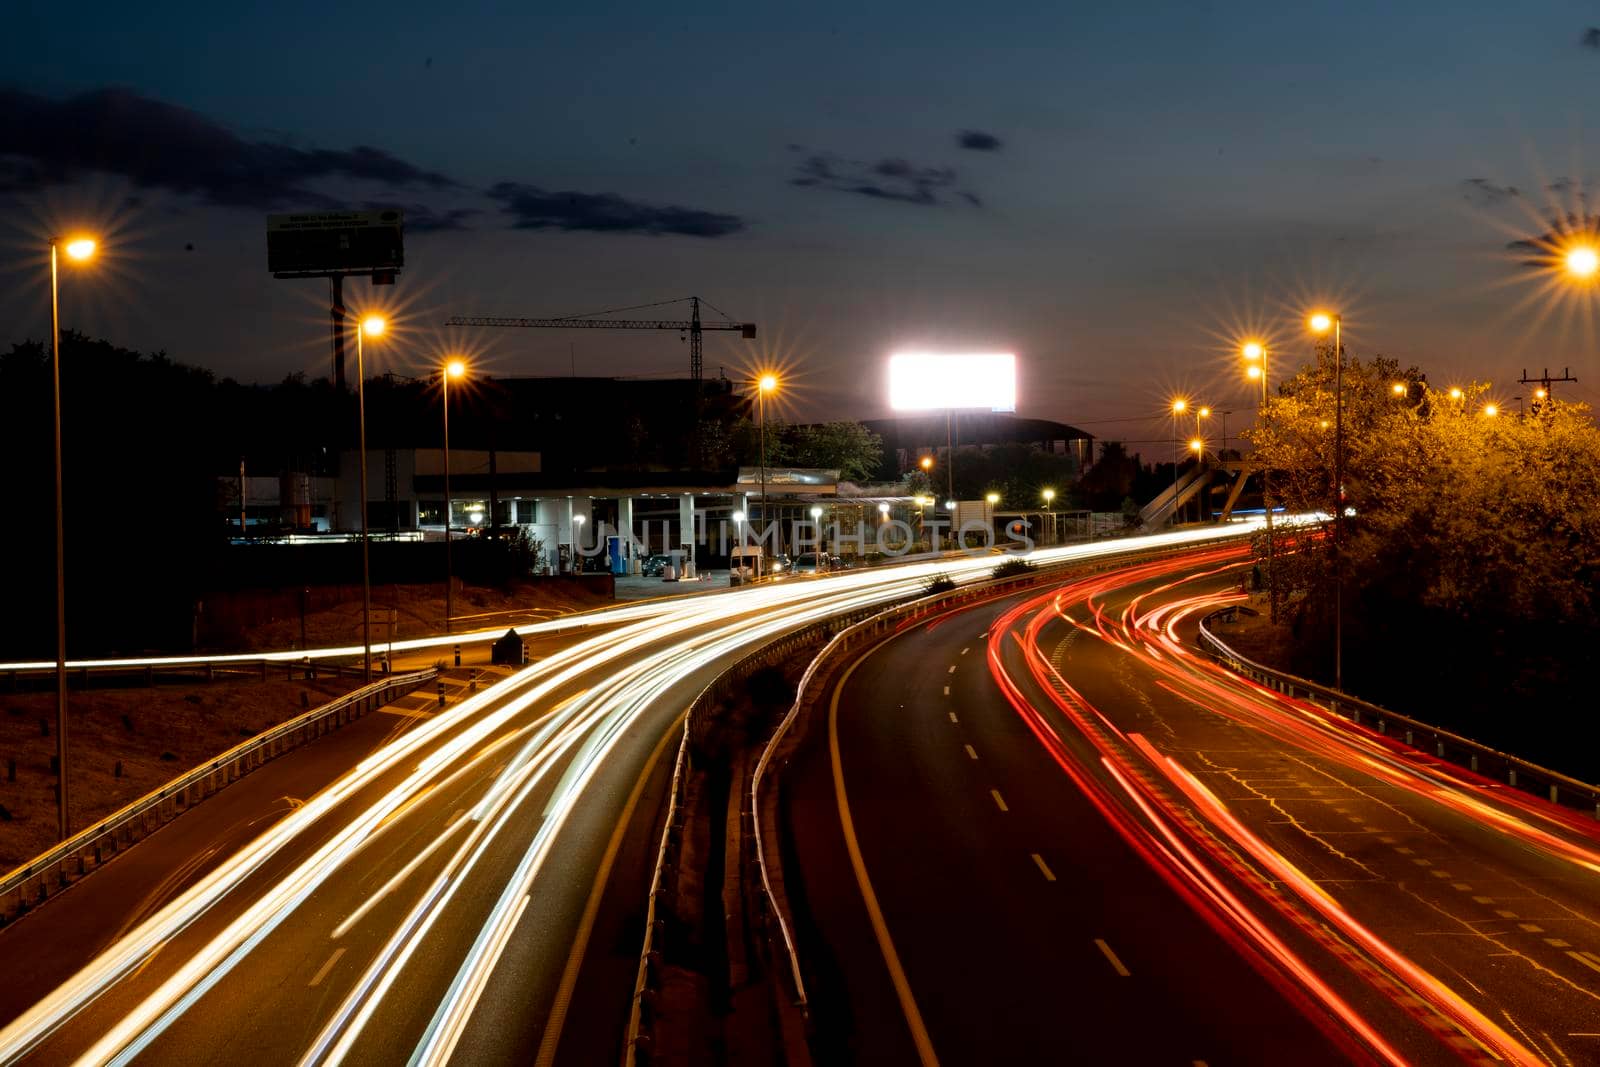 Madrid, Spain - Sep 24, 2022: Long exposure shot taken from a bridge that crosses the M-607 road in Montecarmelo looking towards Madrid. Hundreds of cars go to and from the city.